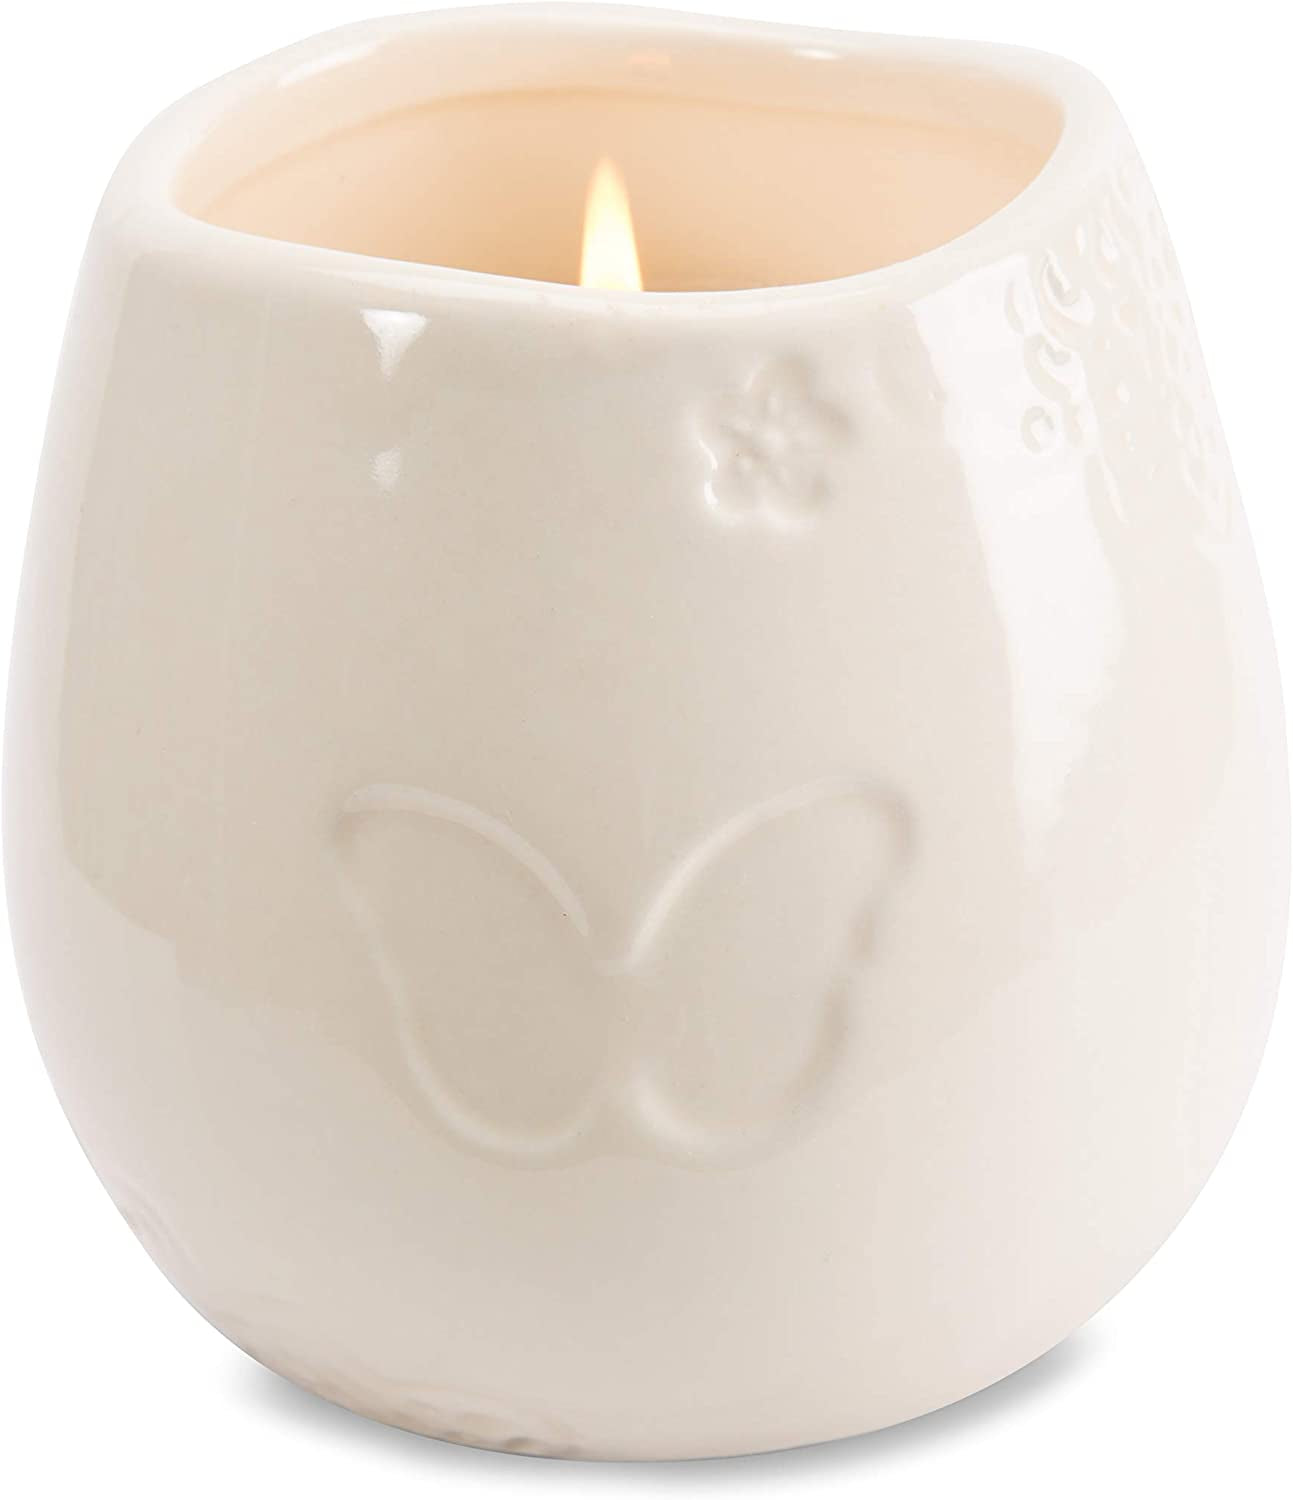 Ceramic Soy Candle Bundle - in Memory and Forever in My Heart Designs (2 Items)